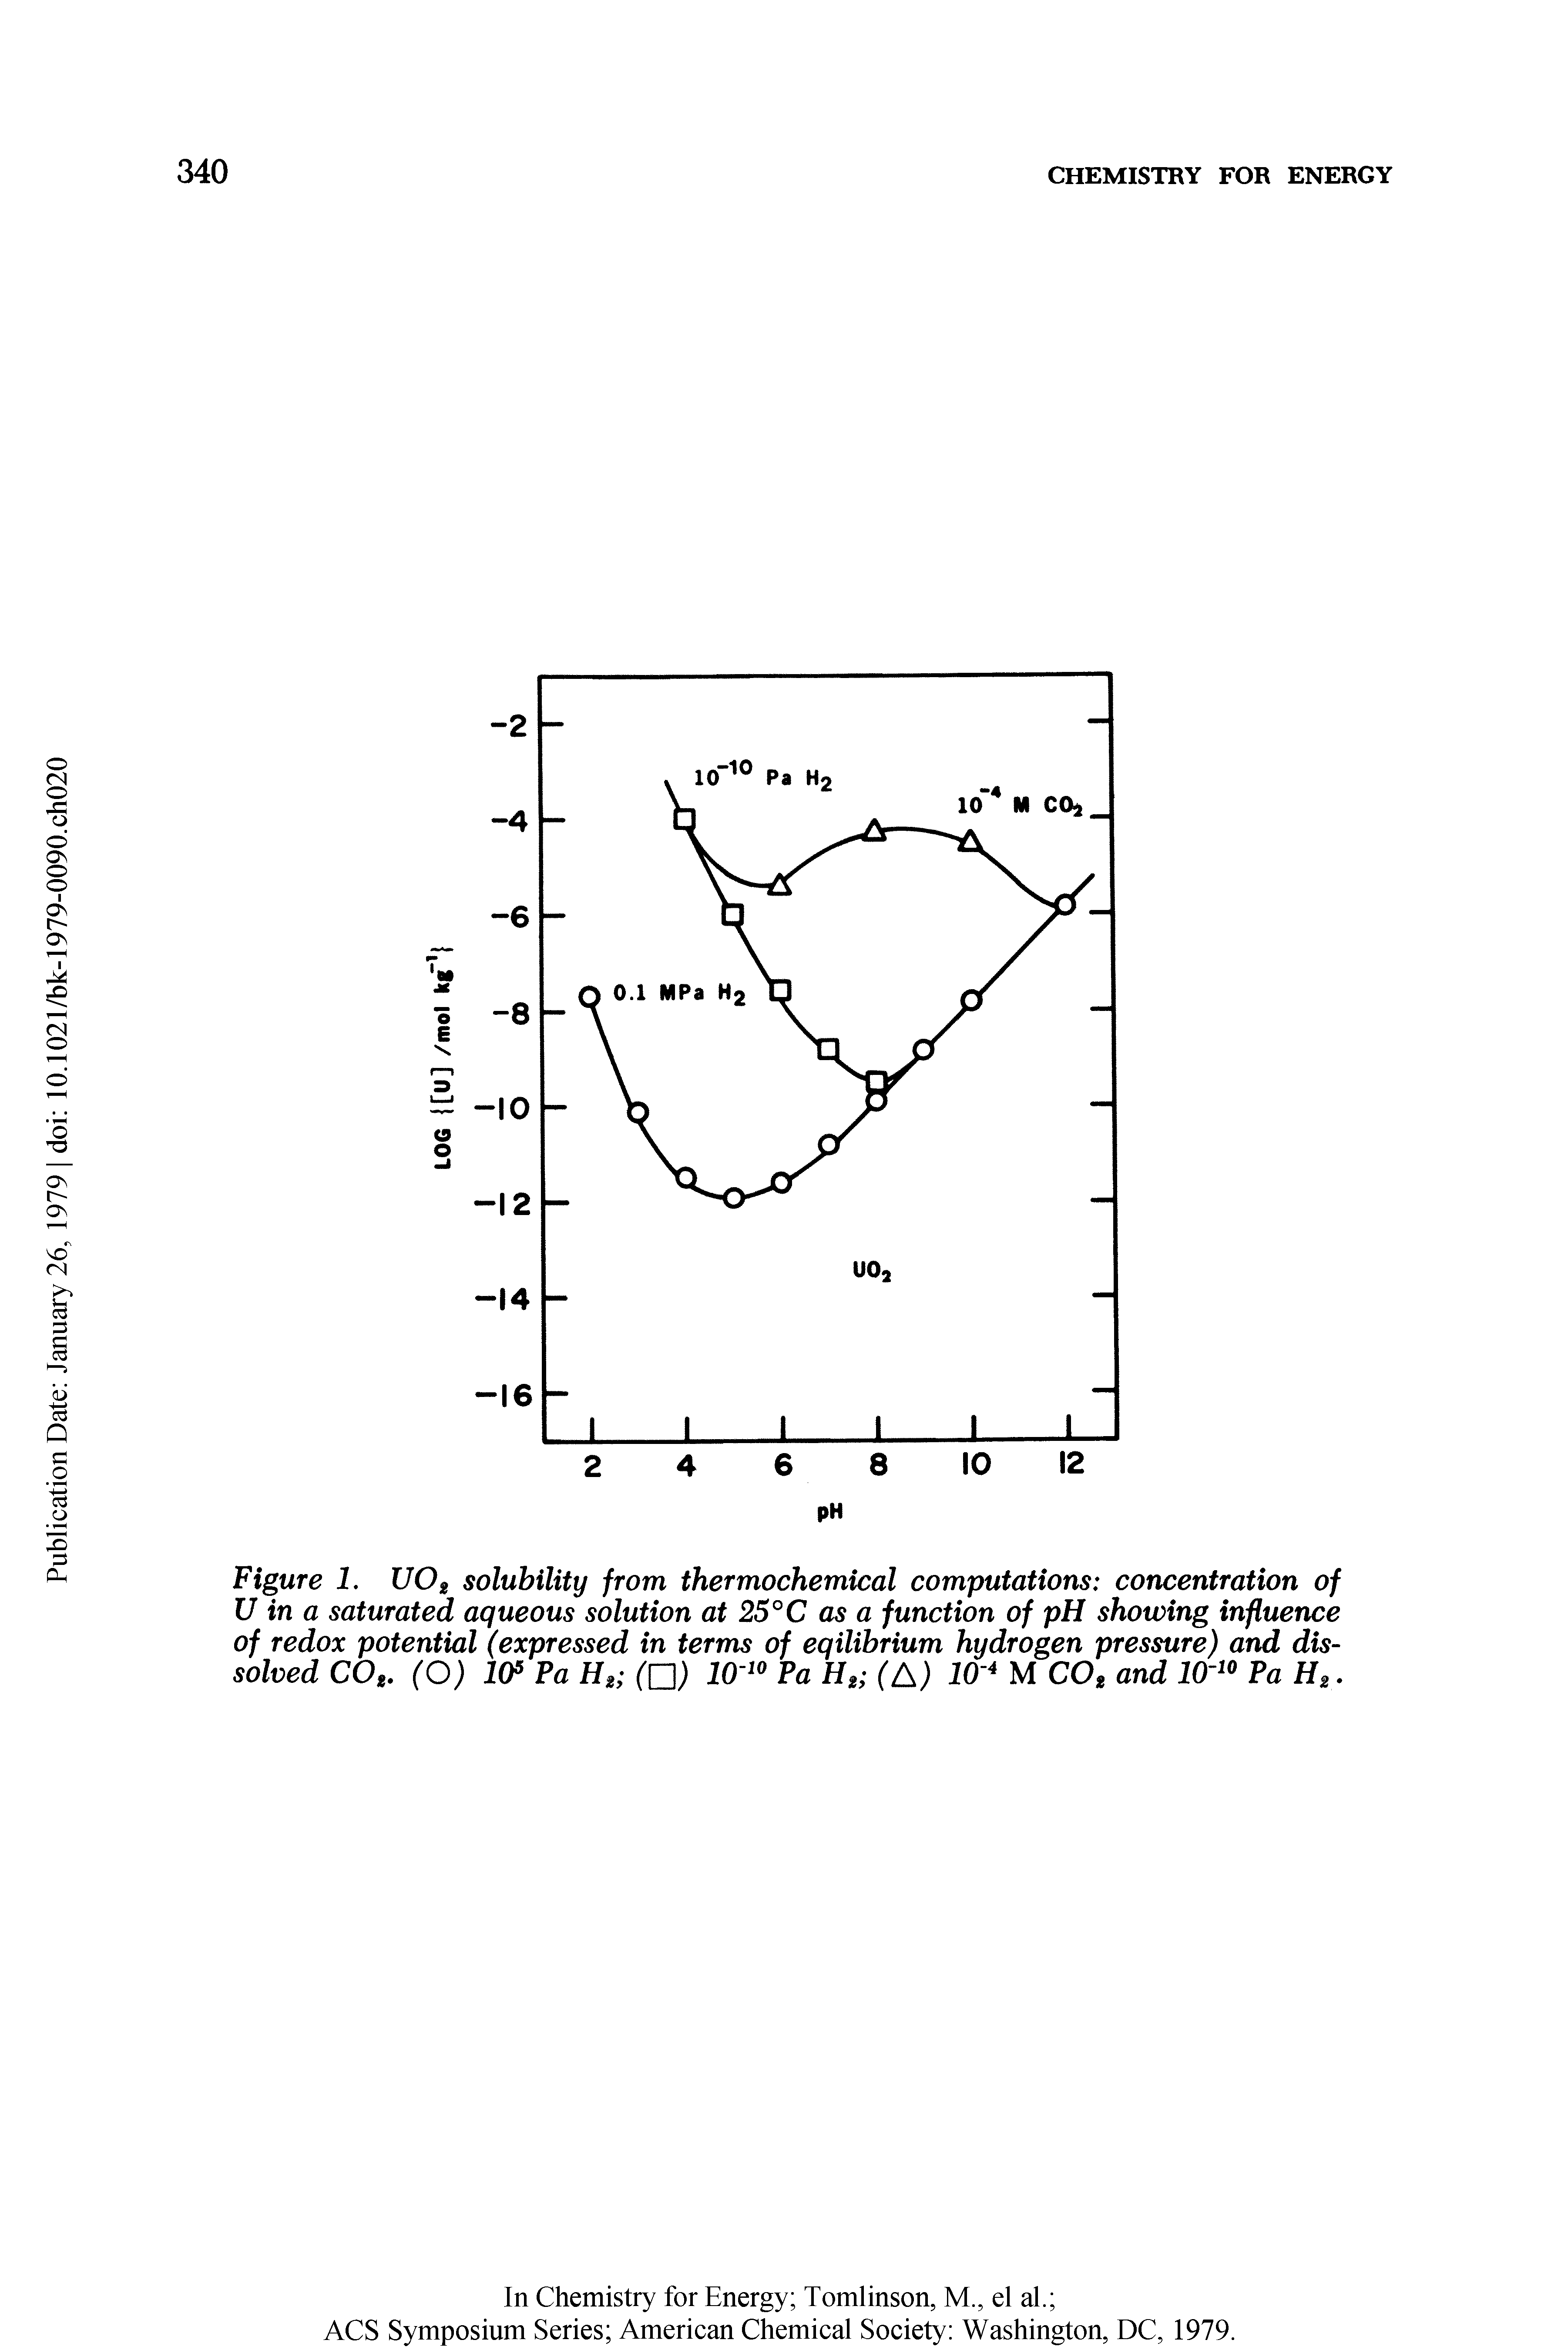 Figure 1. UOg solubility from thermochemical computations concentration of U in a saturated aqueous solution at 25°C as a function of pH showing influence of redox potential (expressed in terms of eqilibrium hydrogen pressure) and dissolved CO,. (O) 10 Pa H, (n) Fa H, (A) 10 M CO, and 10 Pa H,.